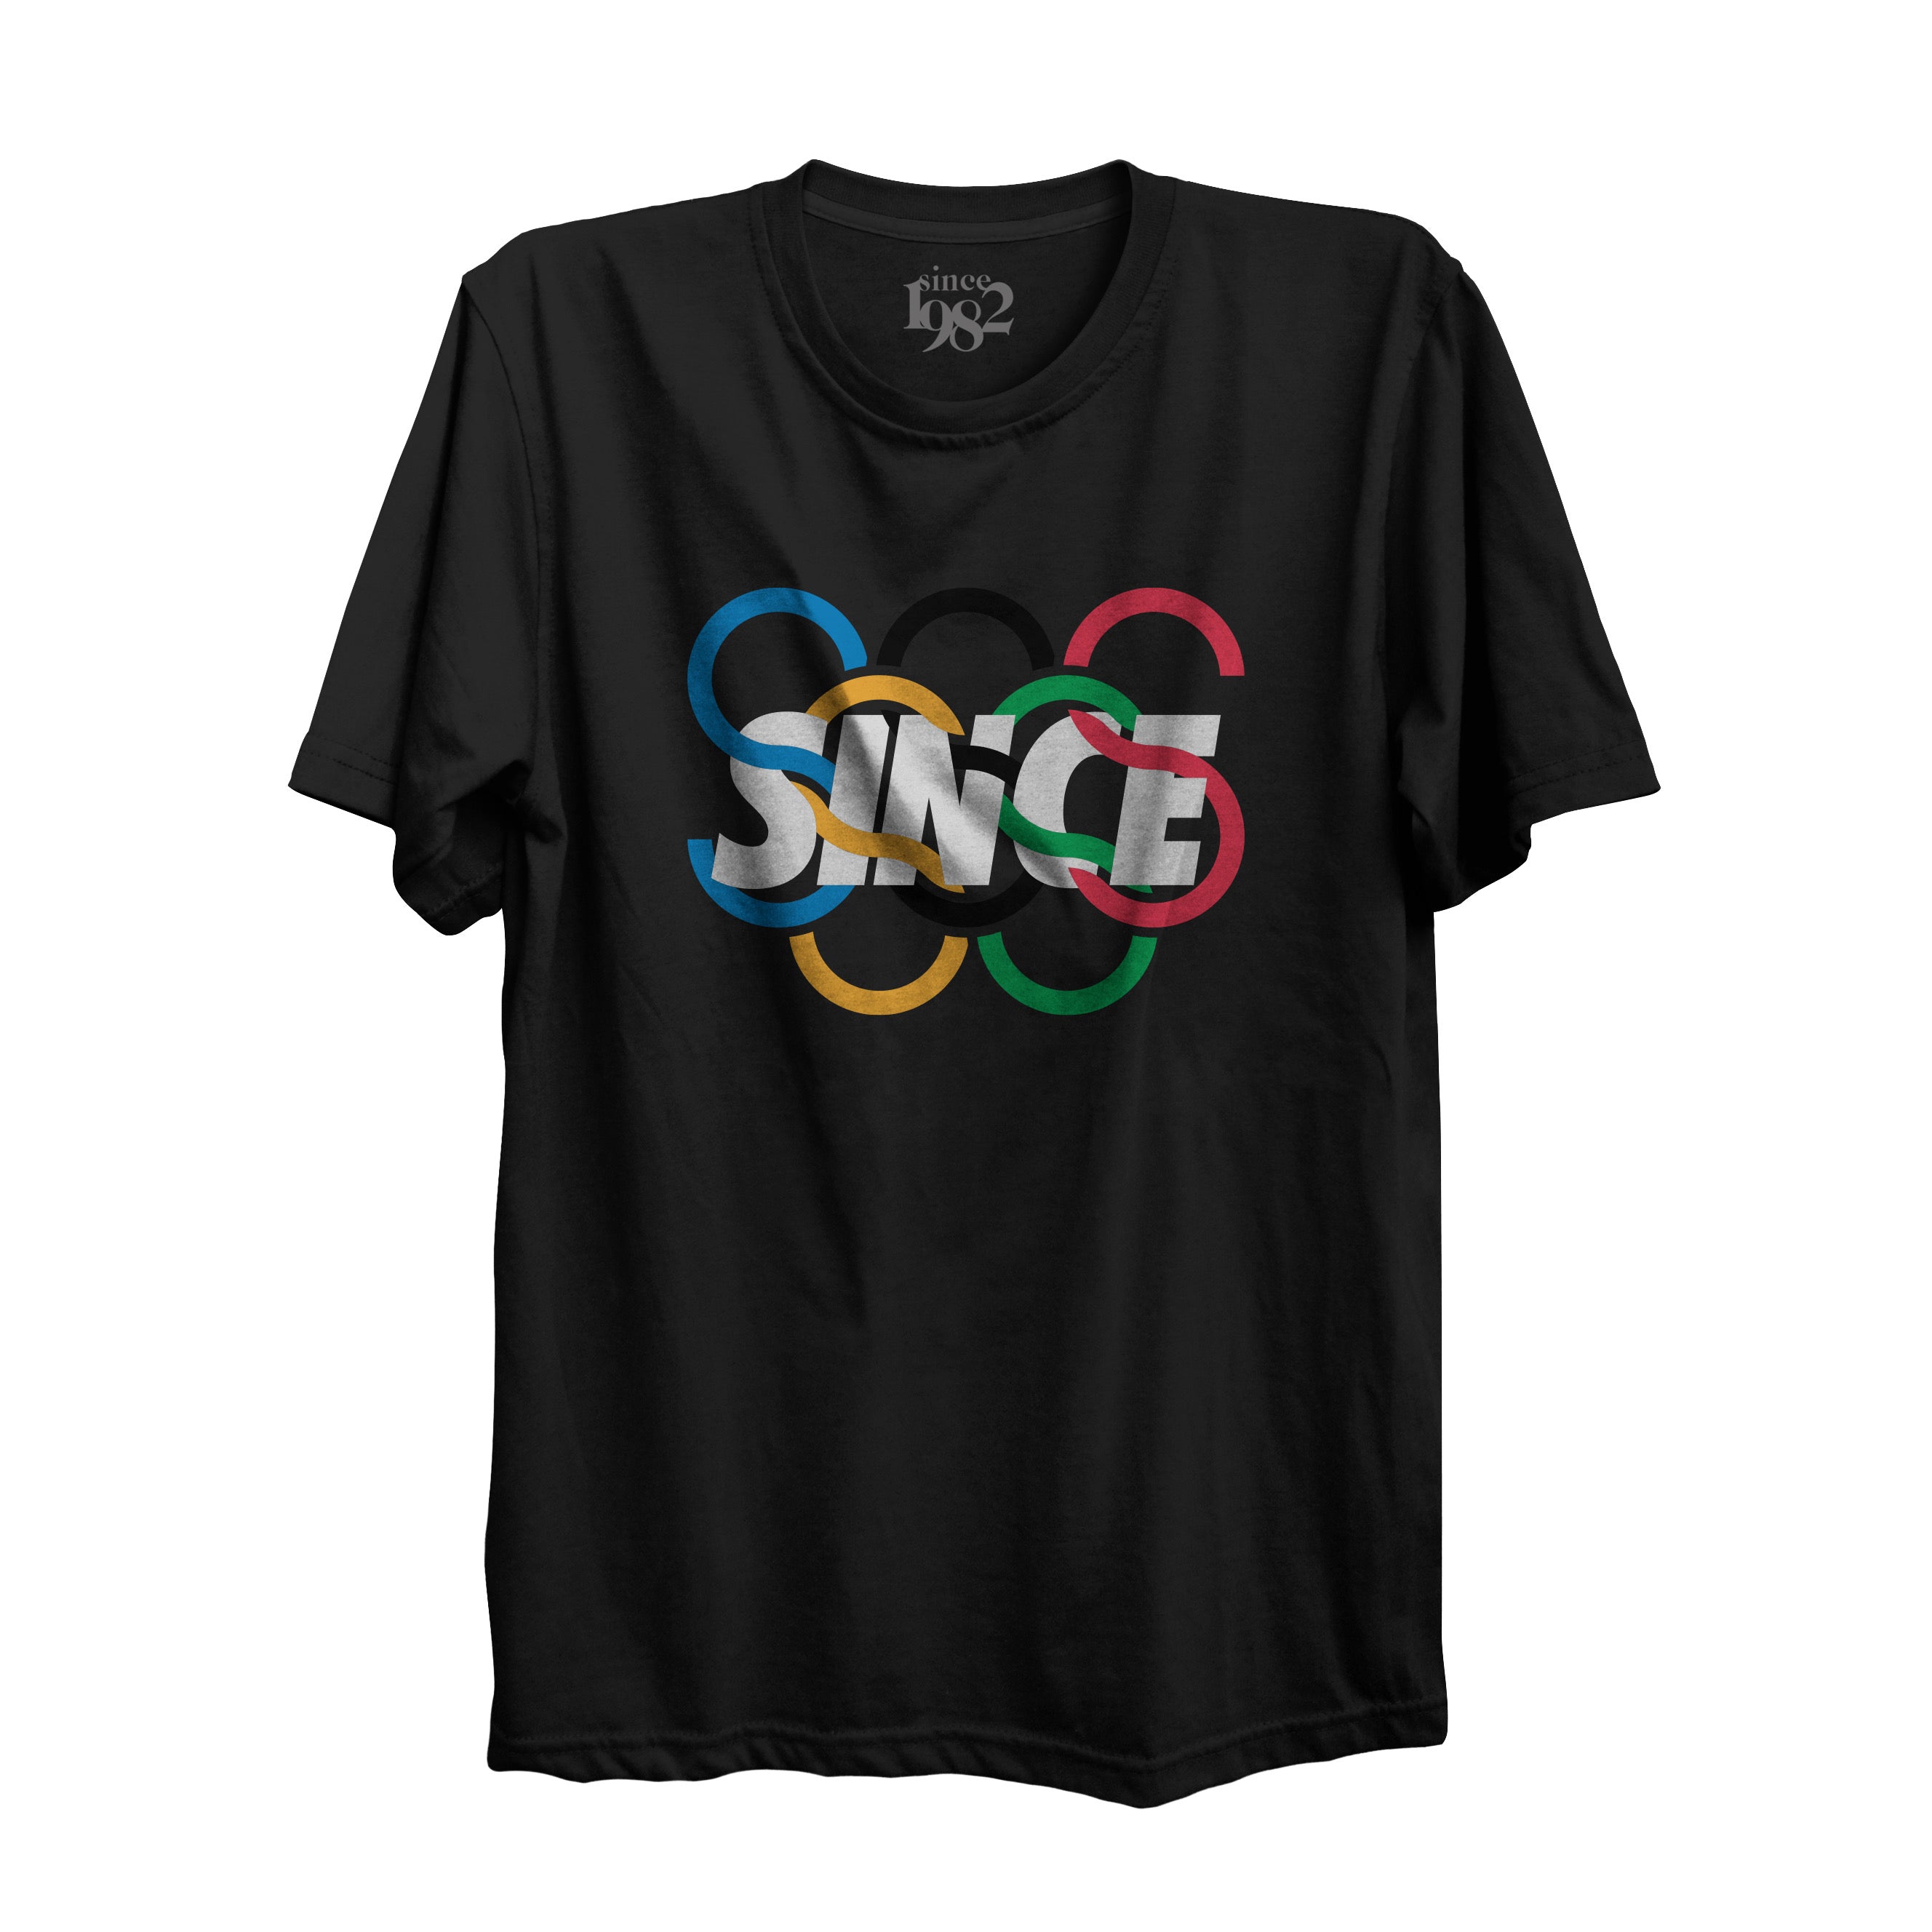 Since Games Tee